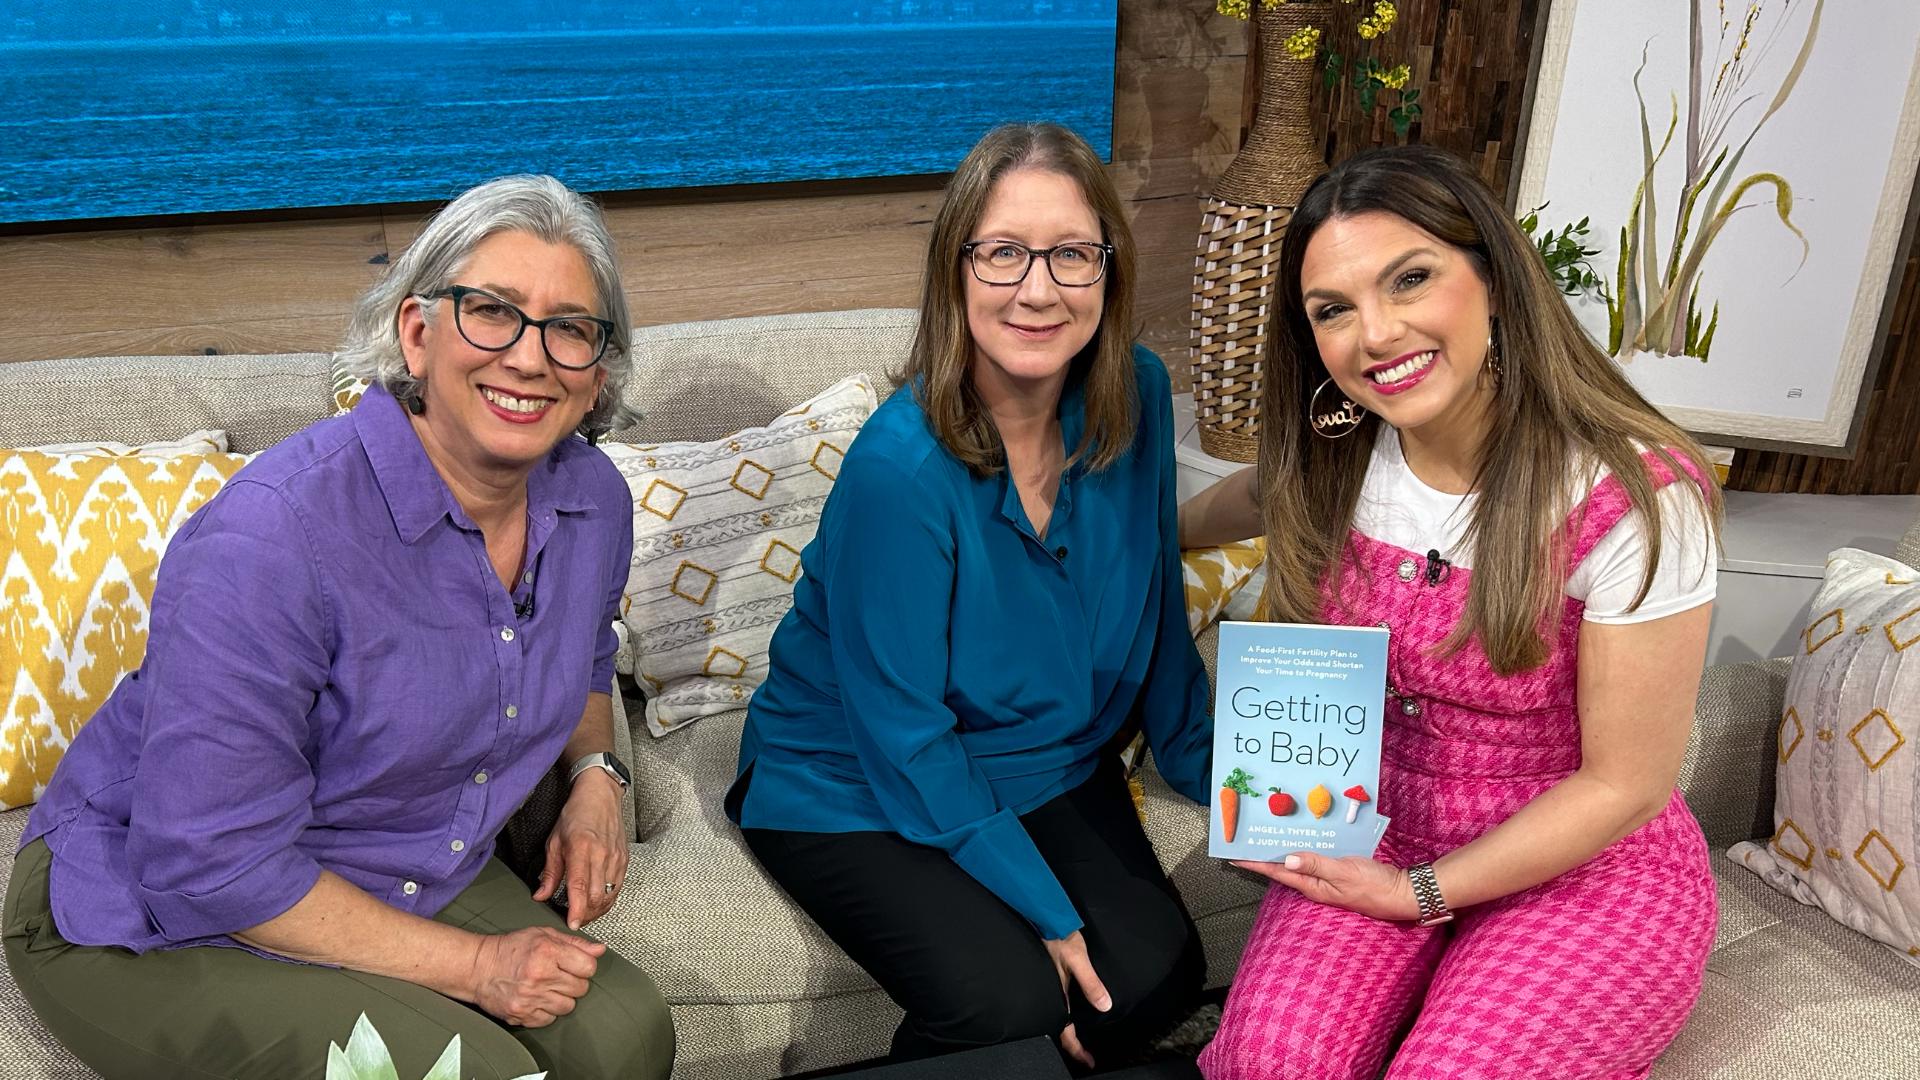 Dr. Angela Thyer and Registered Dietician Just Simon talk about their book "Getting to Baby" and explain how diet and lifestyle can affect fertility. #newdaynw